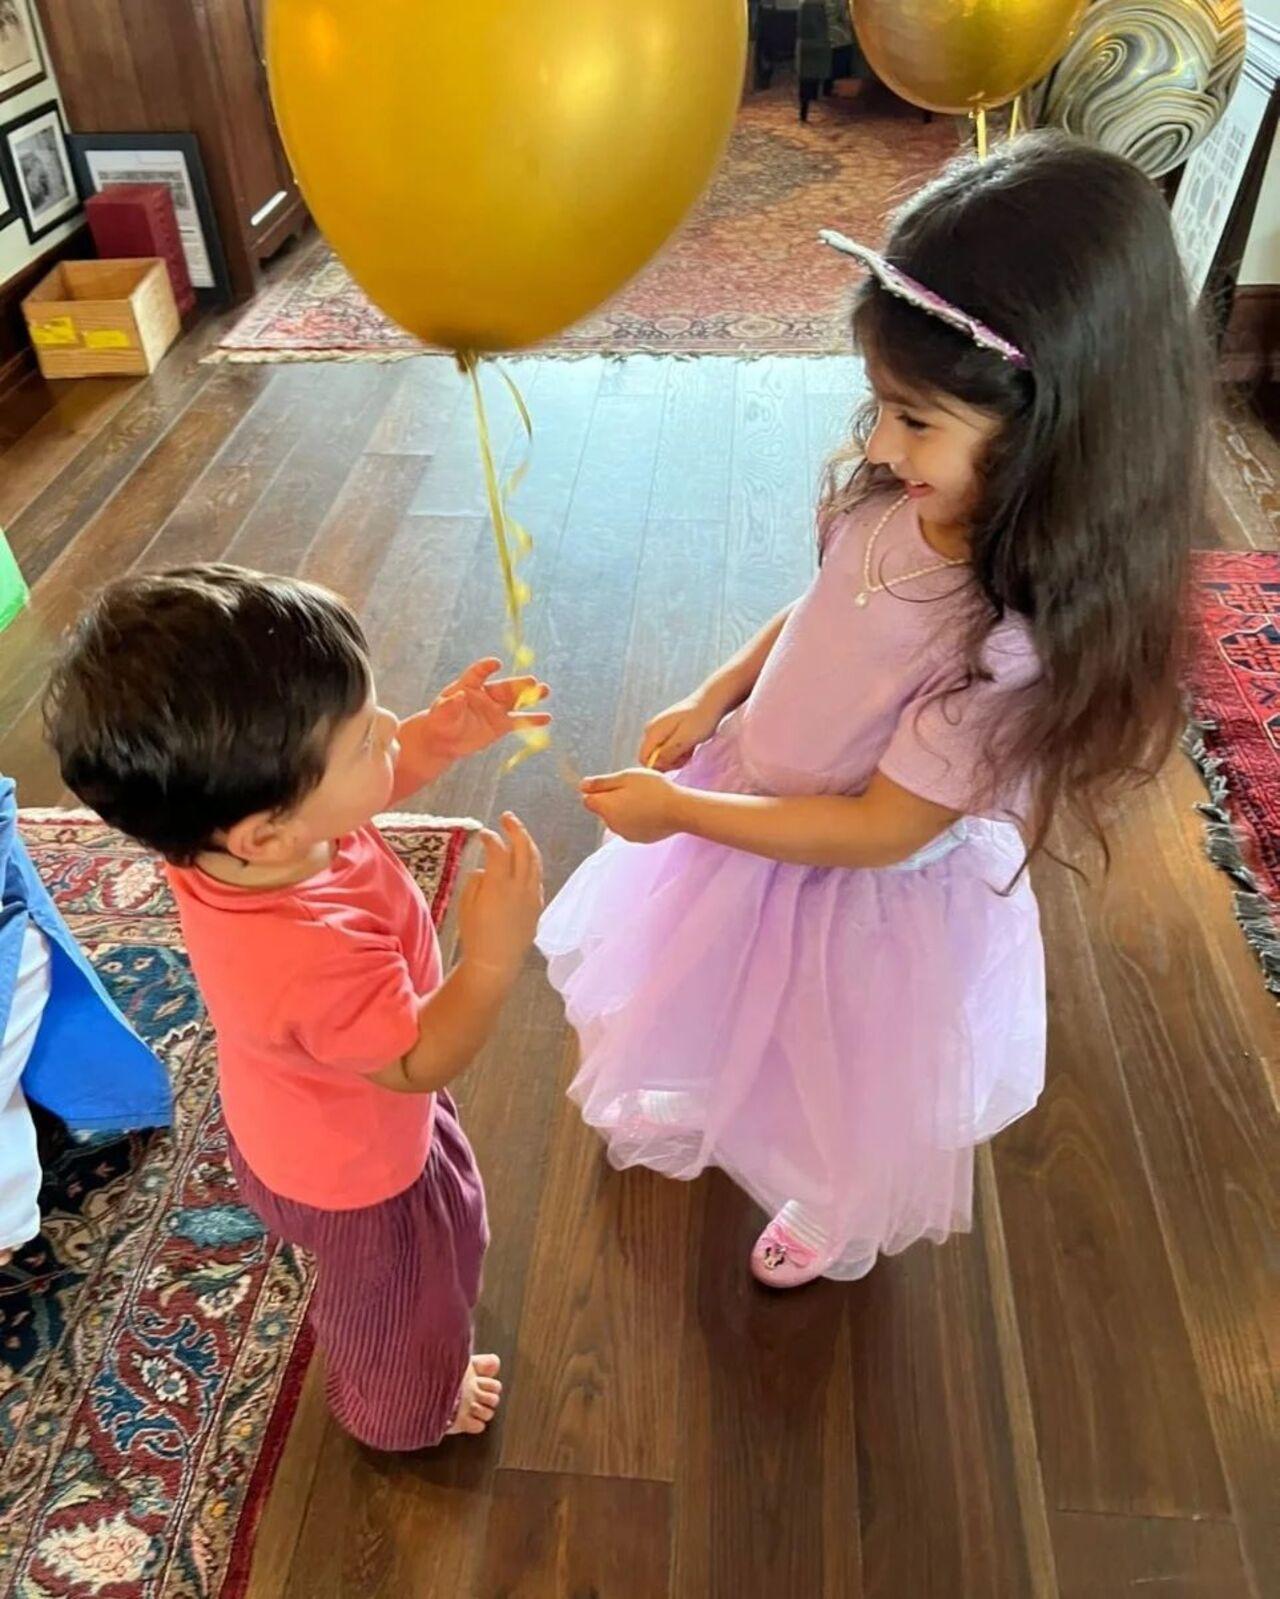 Inaaya Naumi Kemmu took over the role of a protective big sister when Jeh Ali Khan was with her at a party